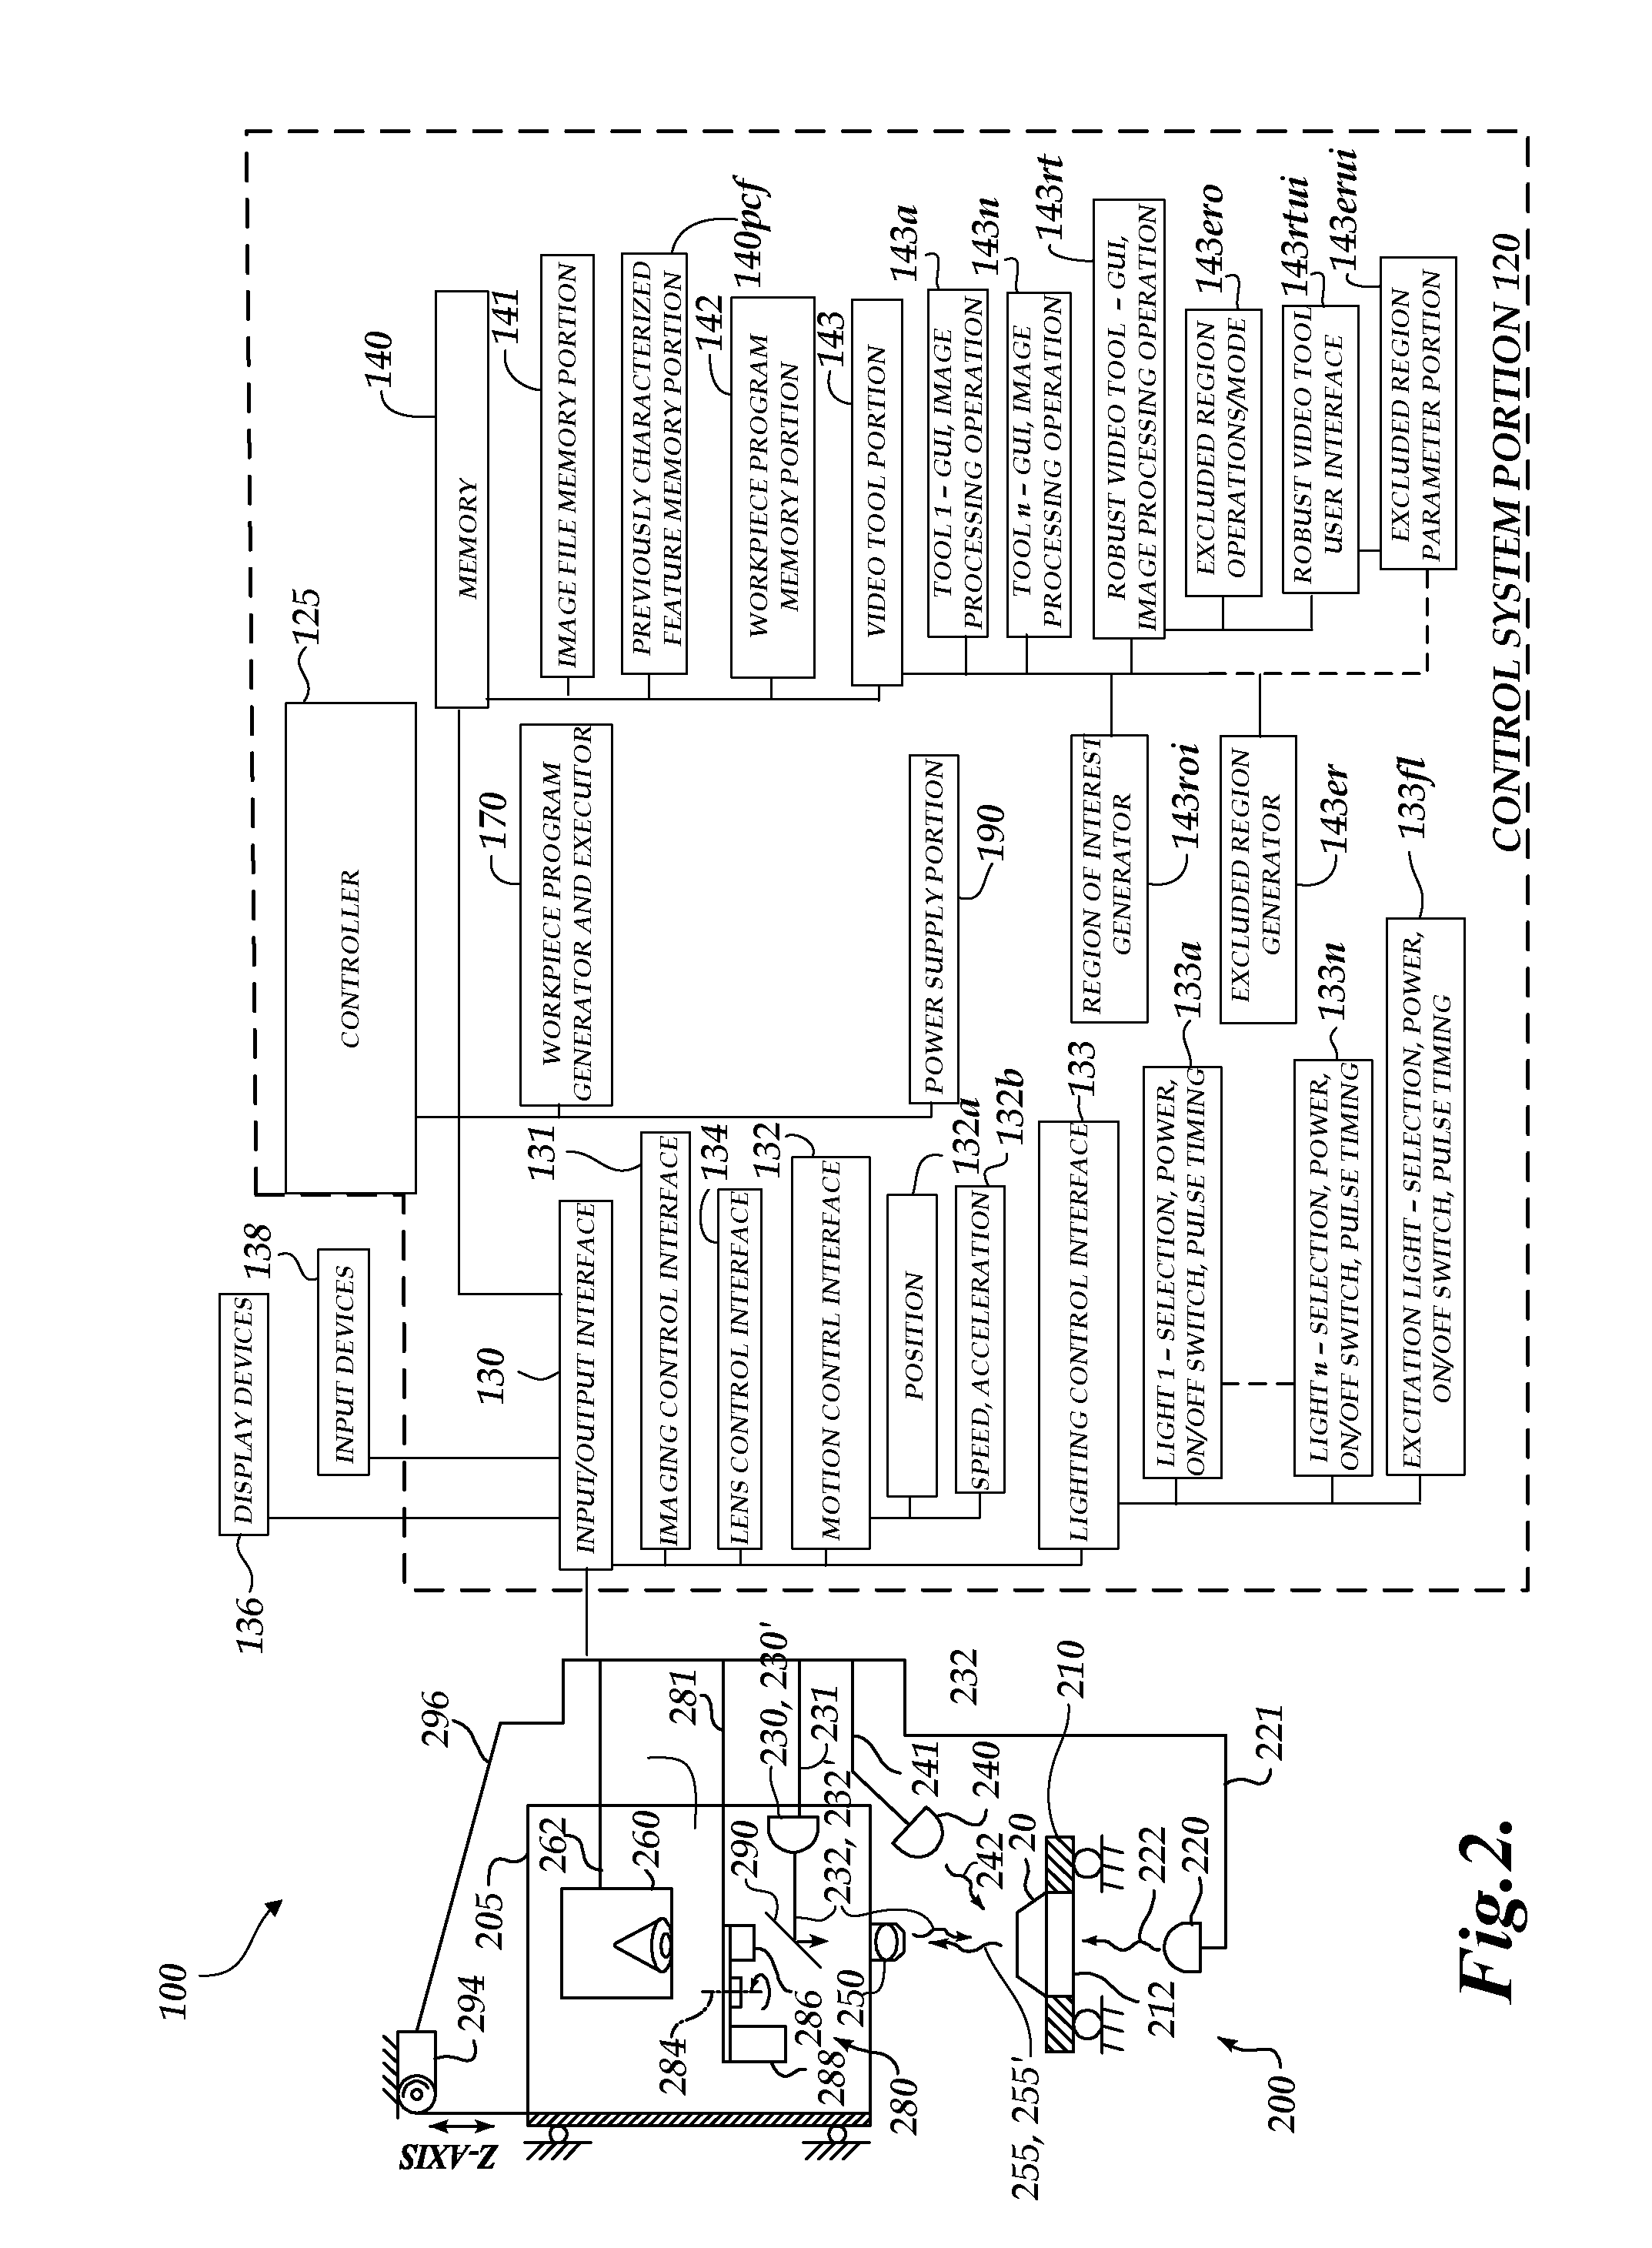 Inspecting potentially interfering features in a machine vision system